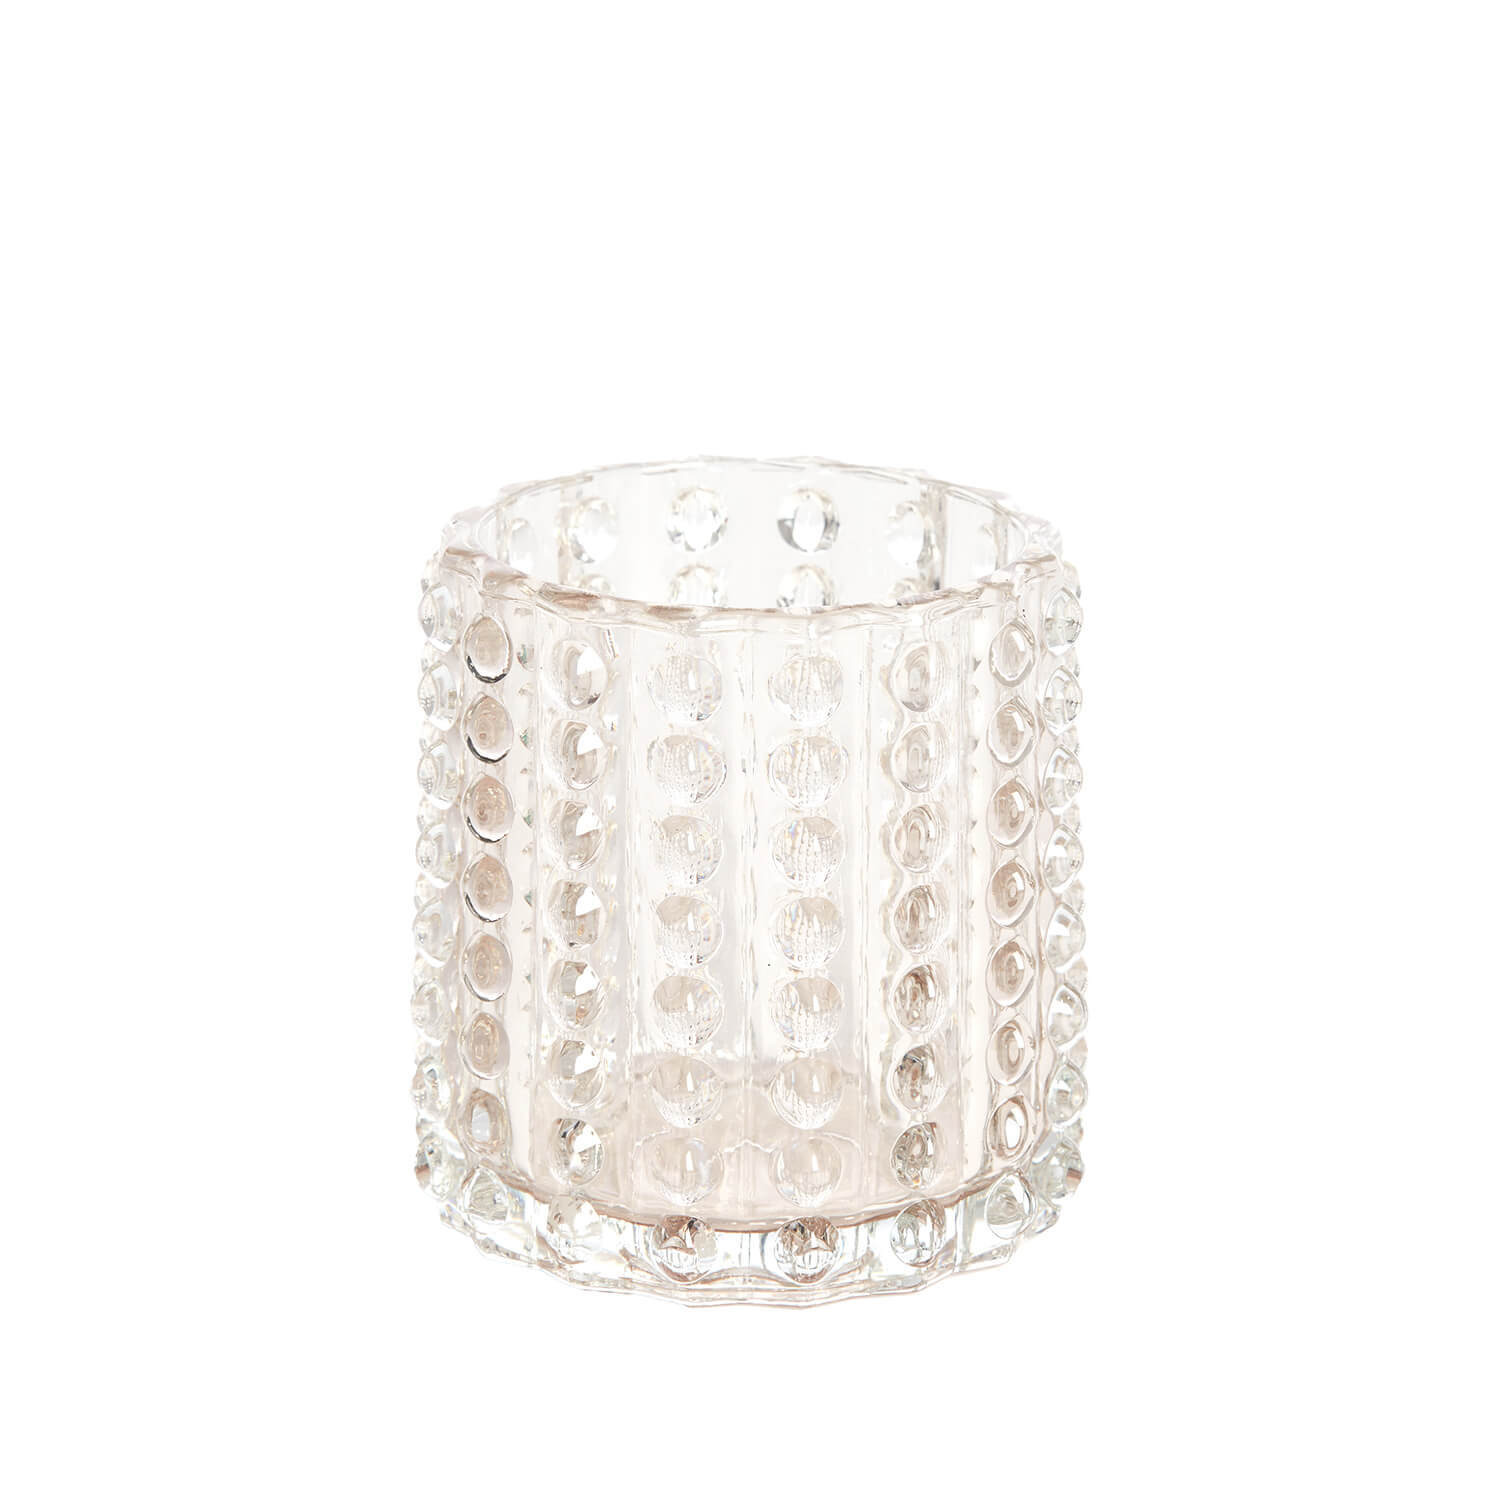 Graham and Green Cream Bubble Tealight Holder - image 1